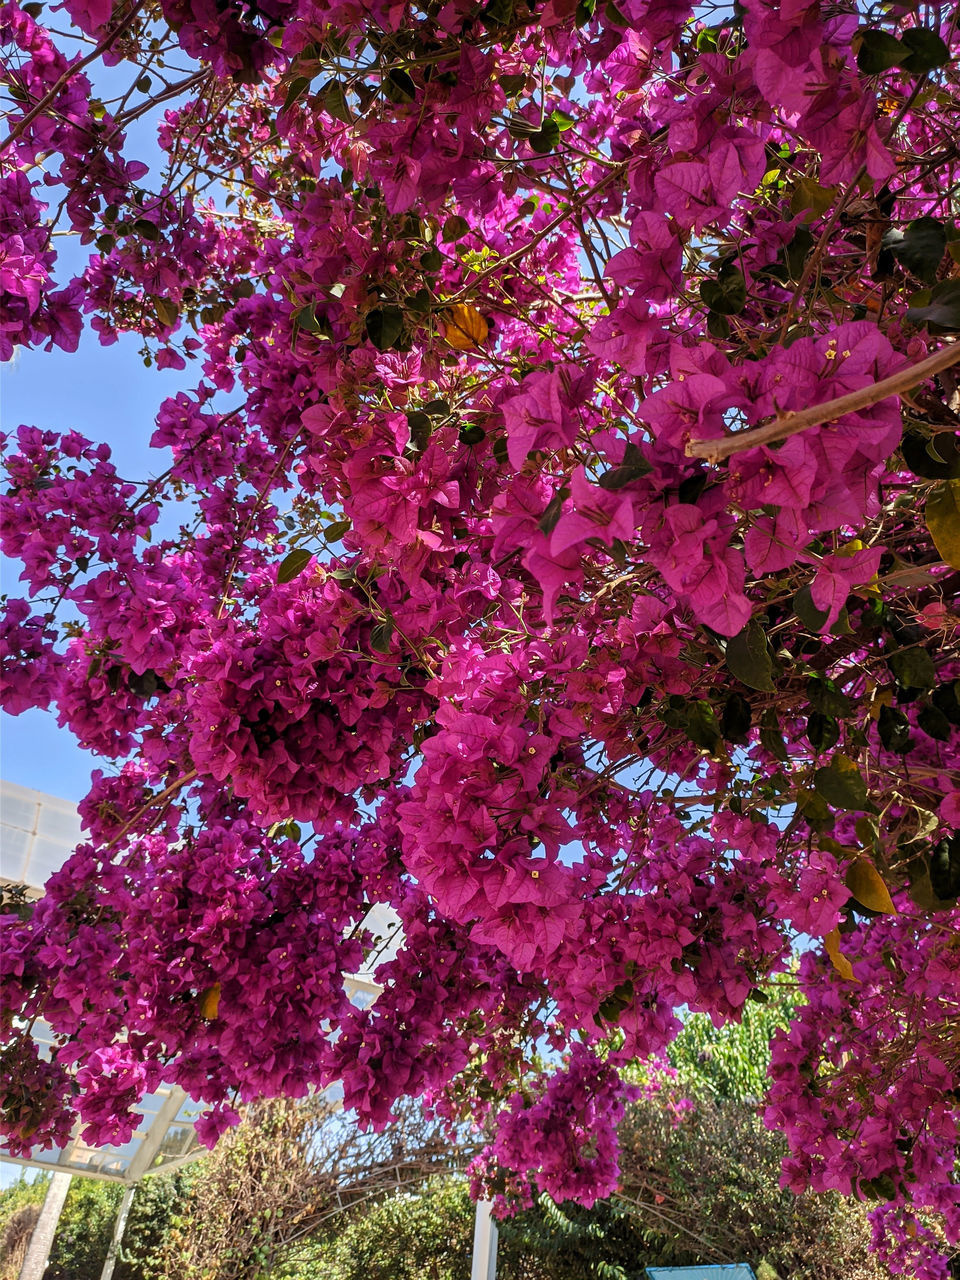 plant, tree, beauty in nature, growth, flower, flowering plant, pink, blossom, nature, freshness, day, fragility, no people, low angle view, shrub, springtime, outdoors, branch, sky, park, leaf, tranquility, park - man made space